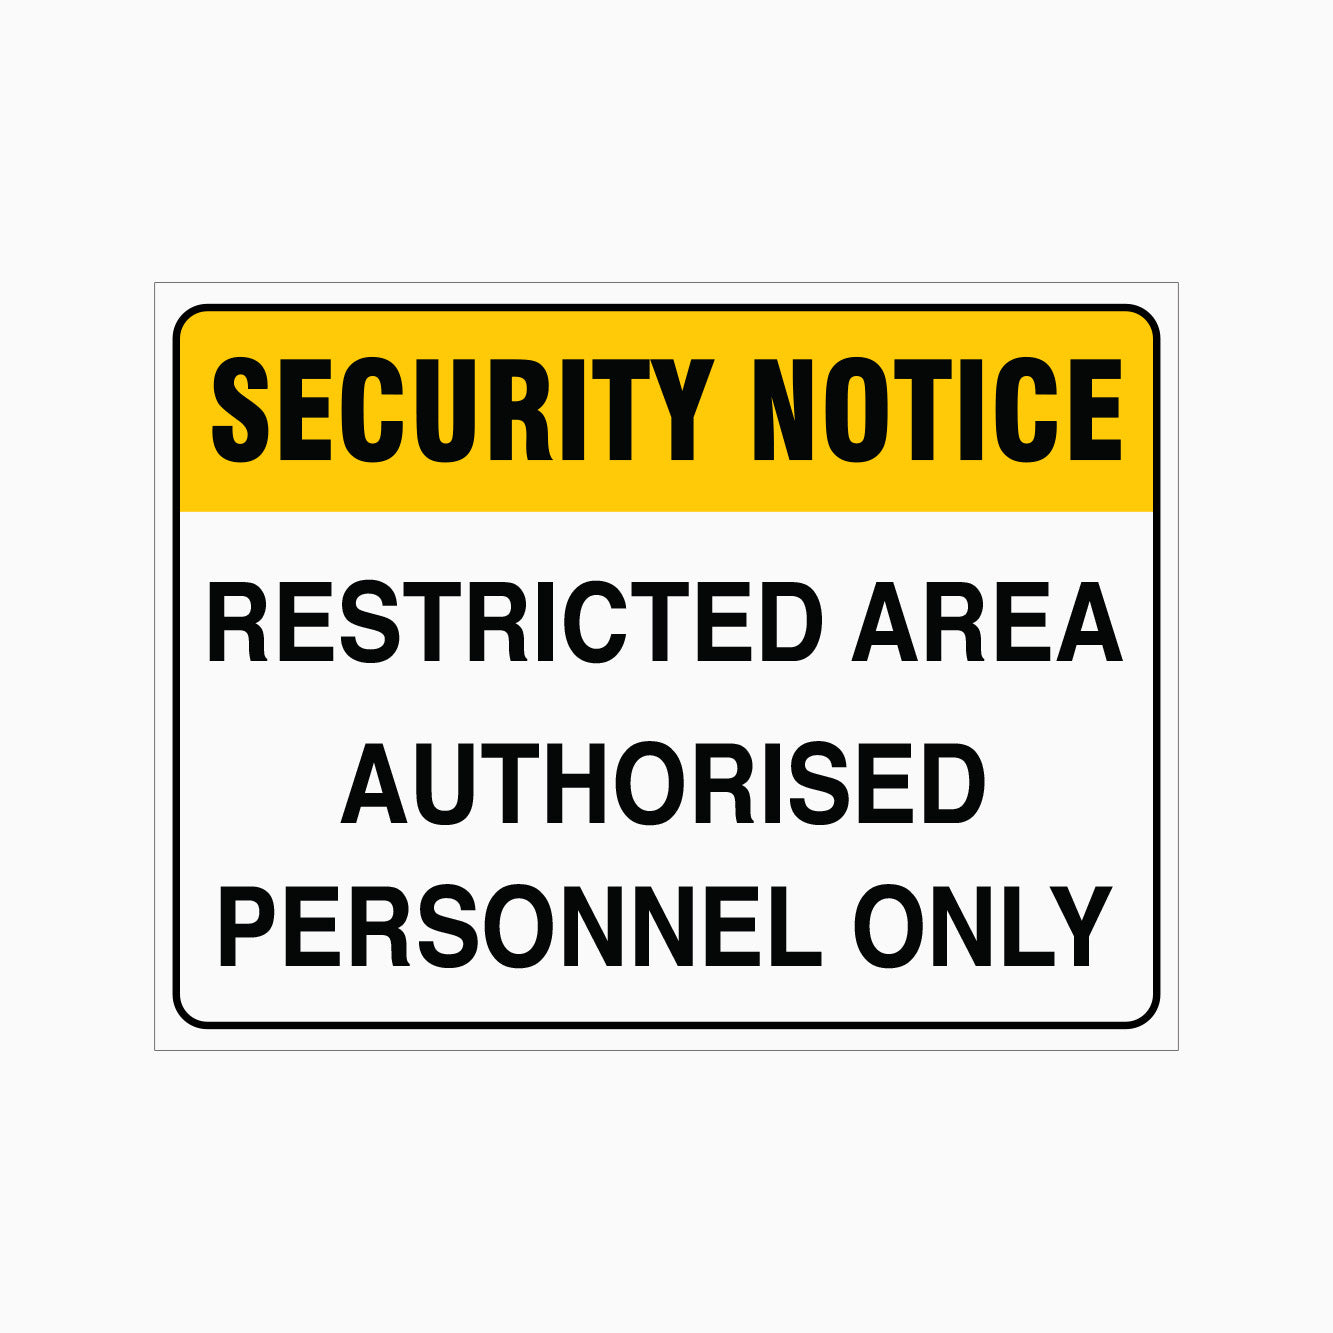 RESTRICTED AREA AUTHORISED PERSONNEL ONLY SIGN - SECURITY NOTICE SIGN